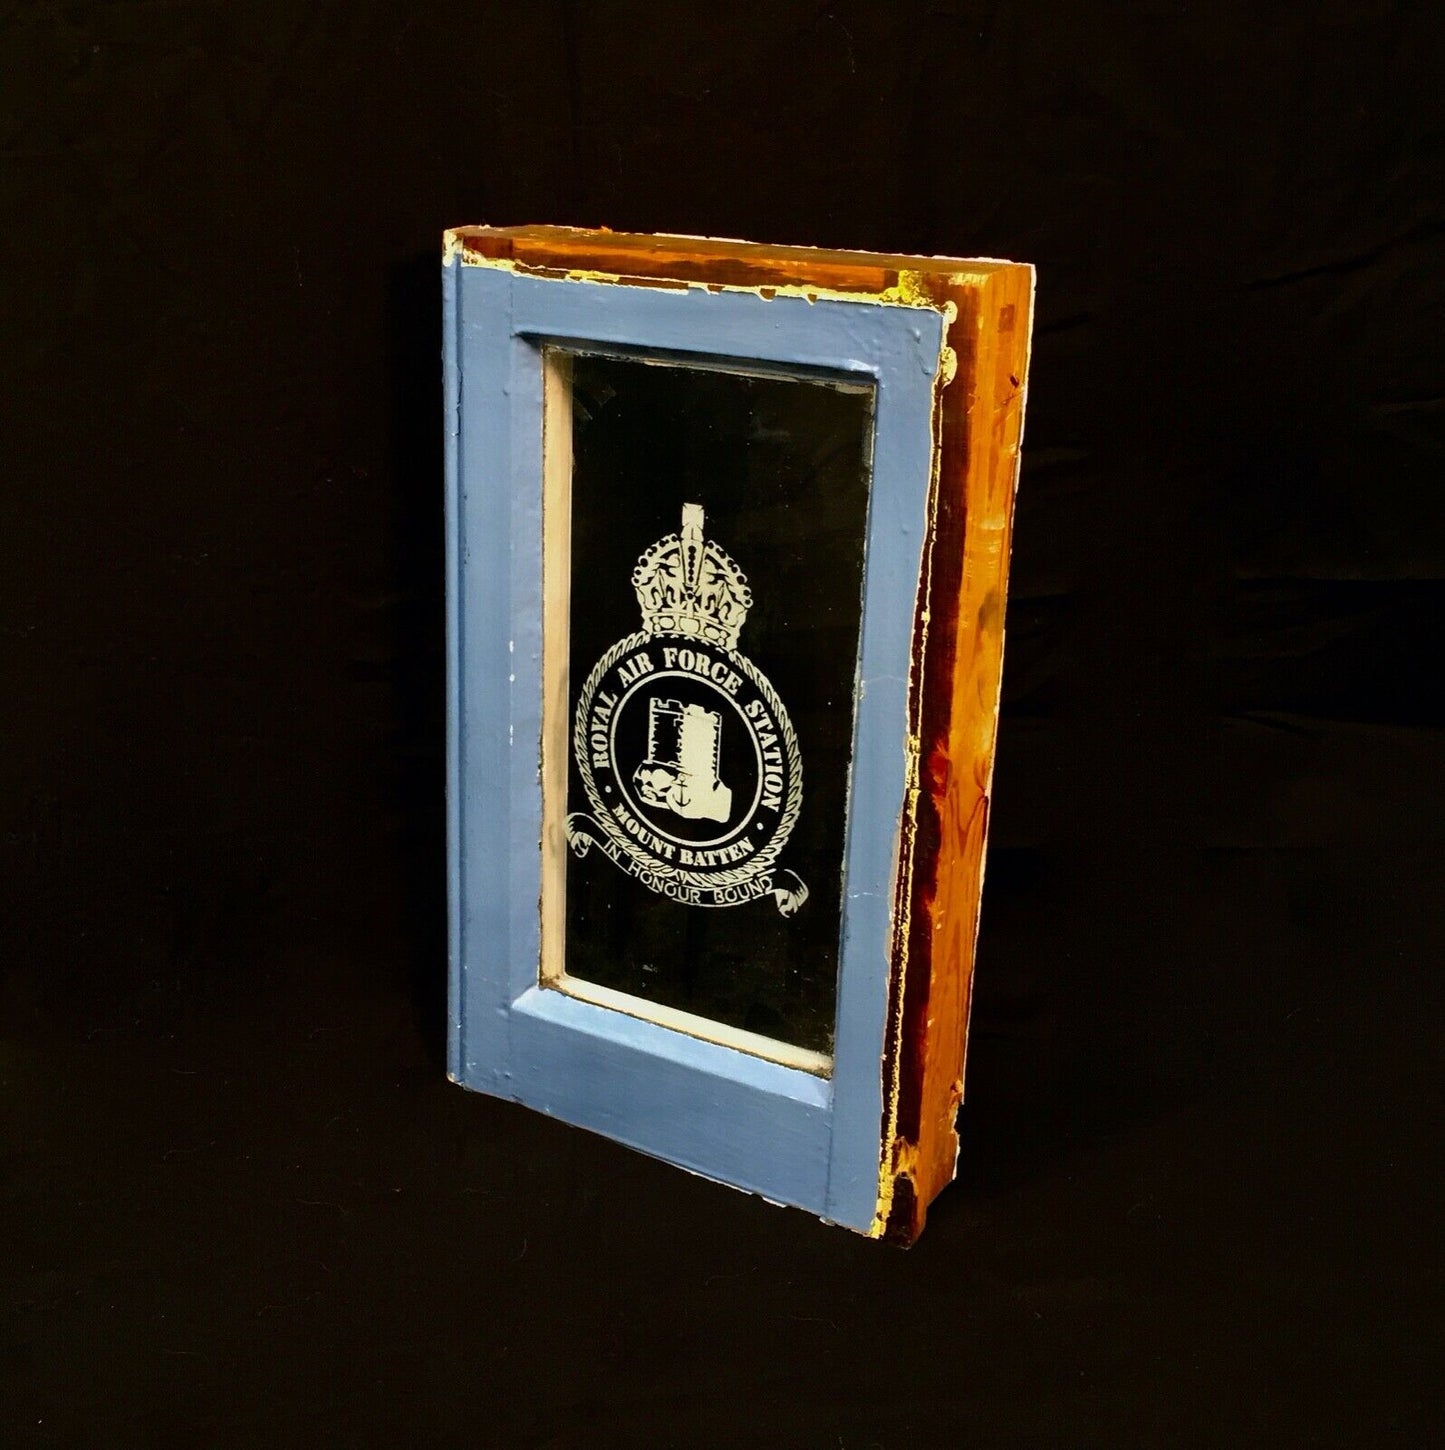 Antique Sign - RAF (Royal Air Force) Mount Batten Salvaged Glass Window in Frame